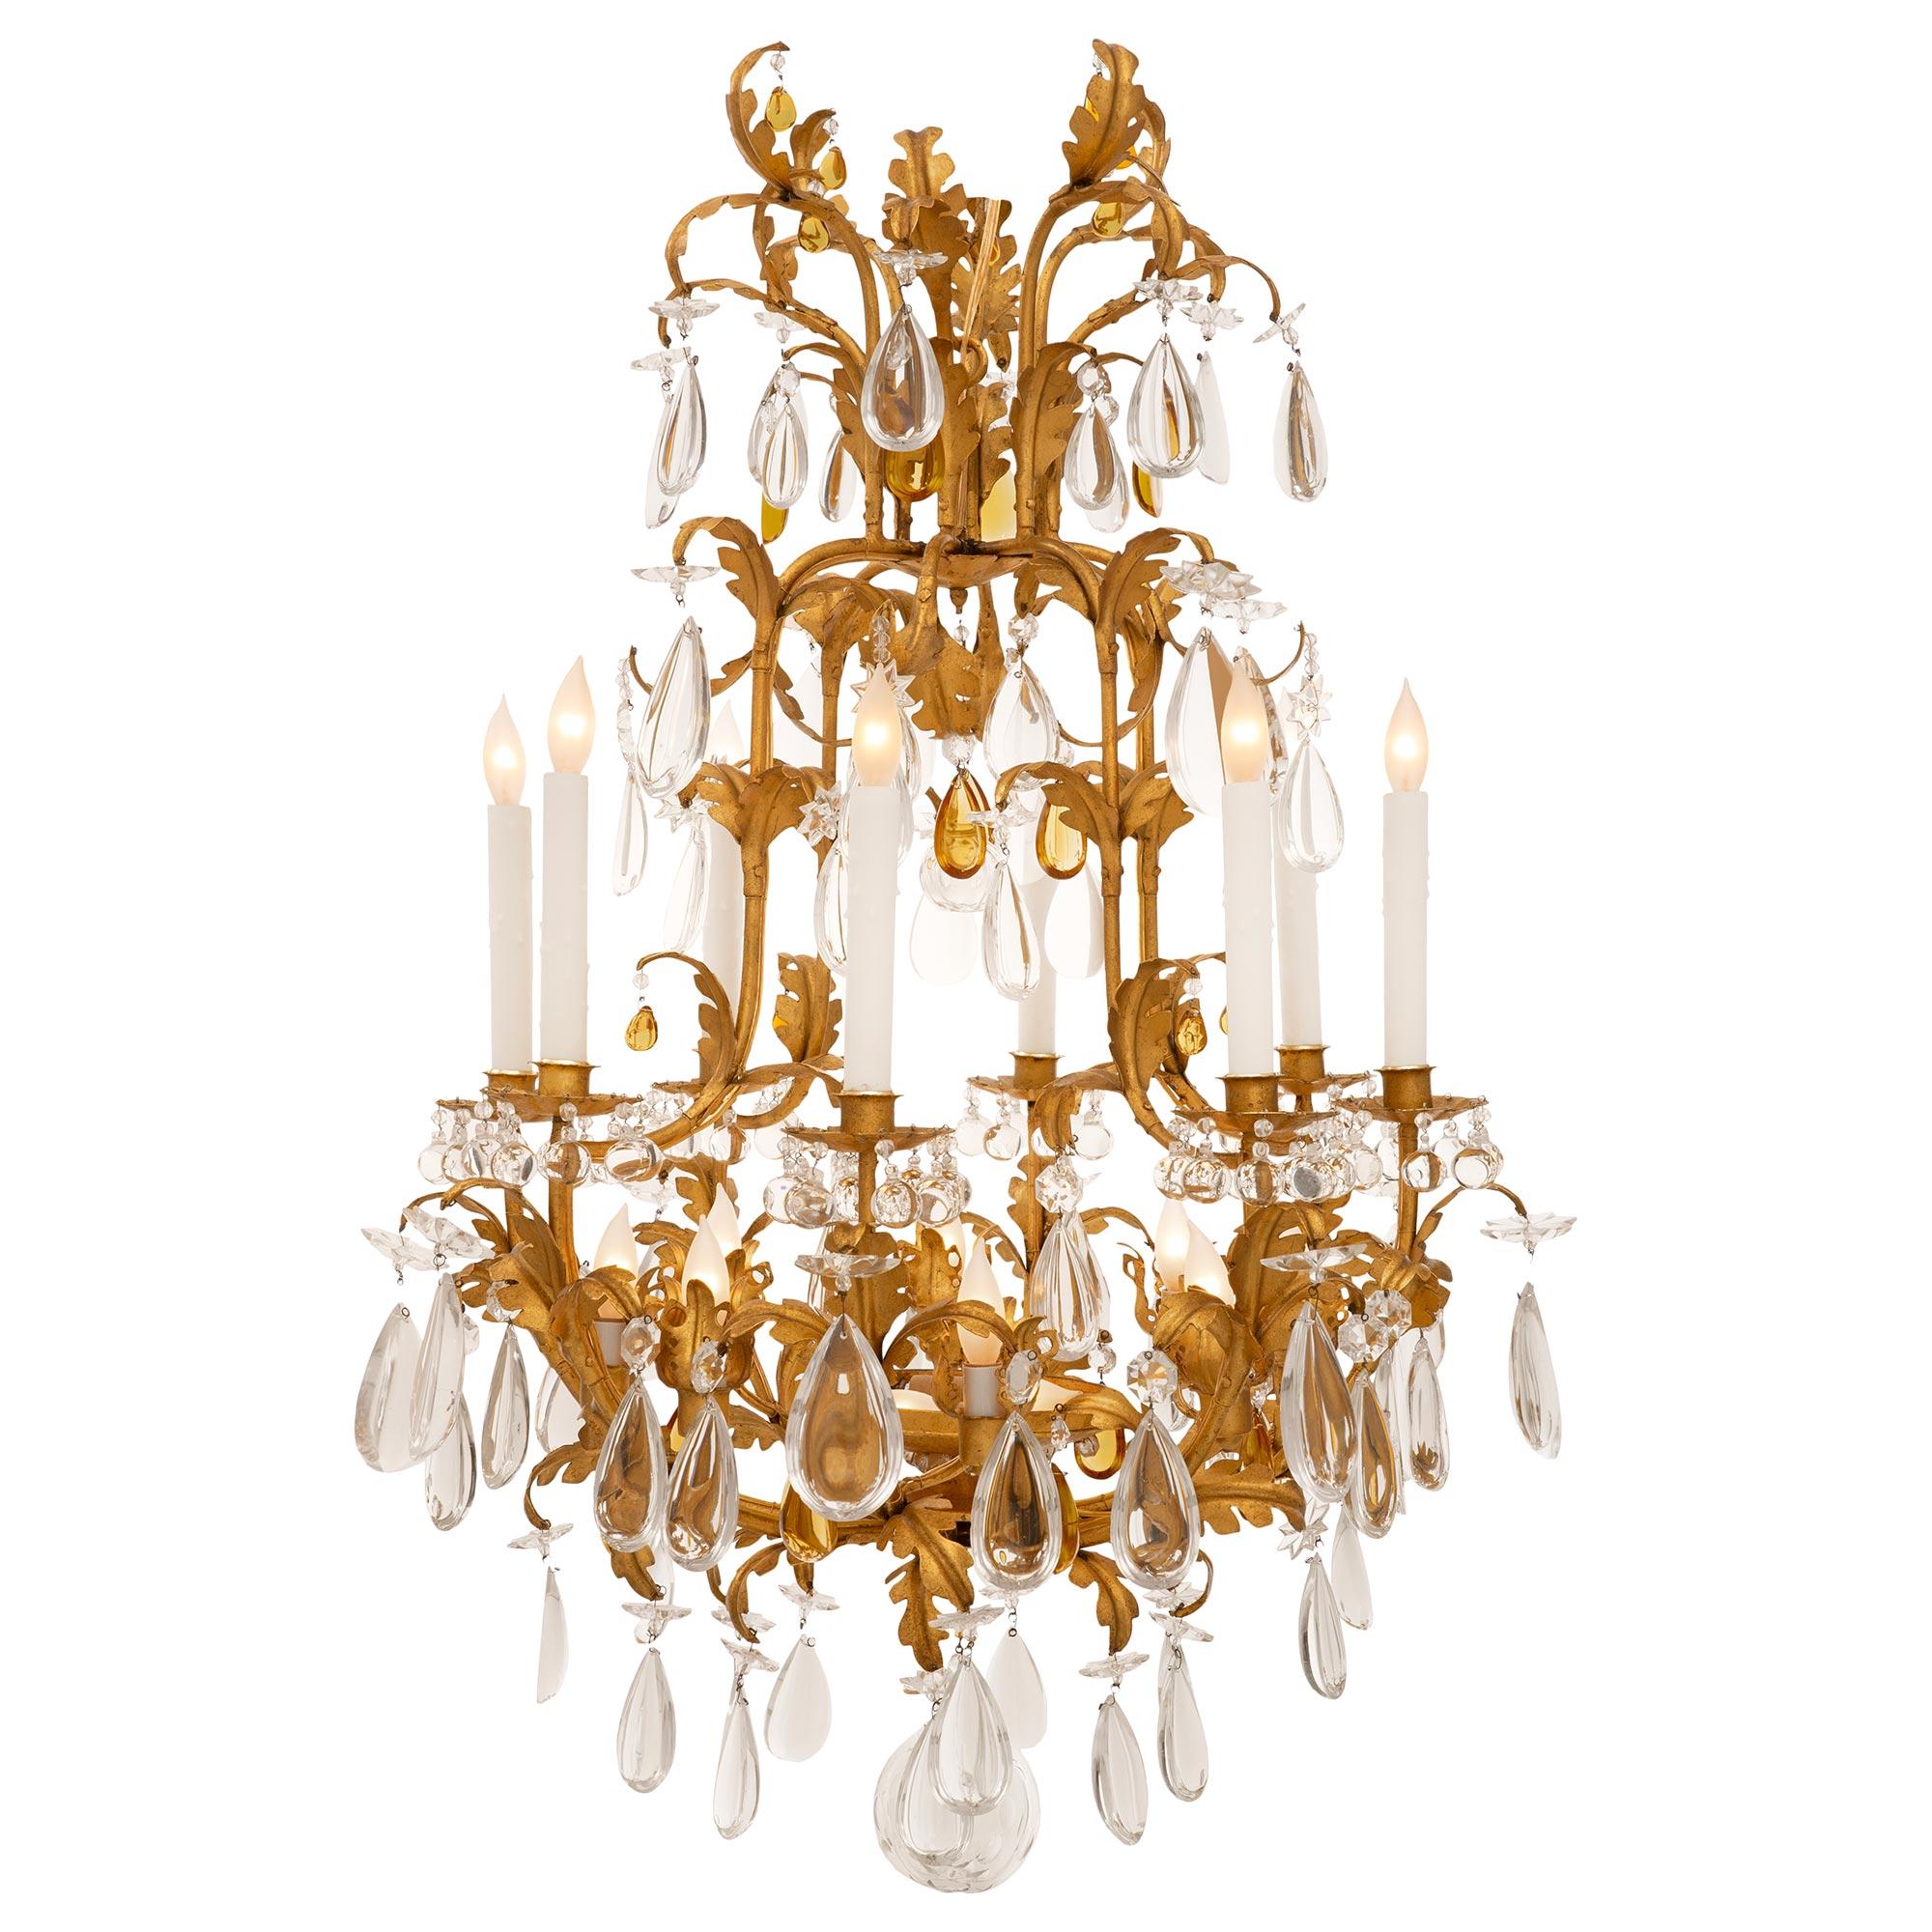 A beautiful and extremely decorative French 19th century Louis XV st. gilt metal and Baccarat crystal chandelier. The eight arm eighteen light chandelier is centered by a most elegant hand blown bottom crystal ball with delicate facetted designs